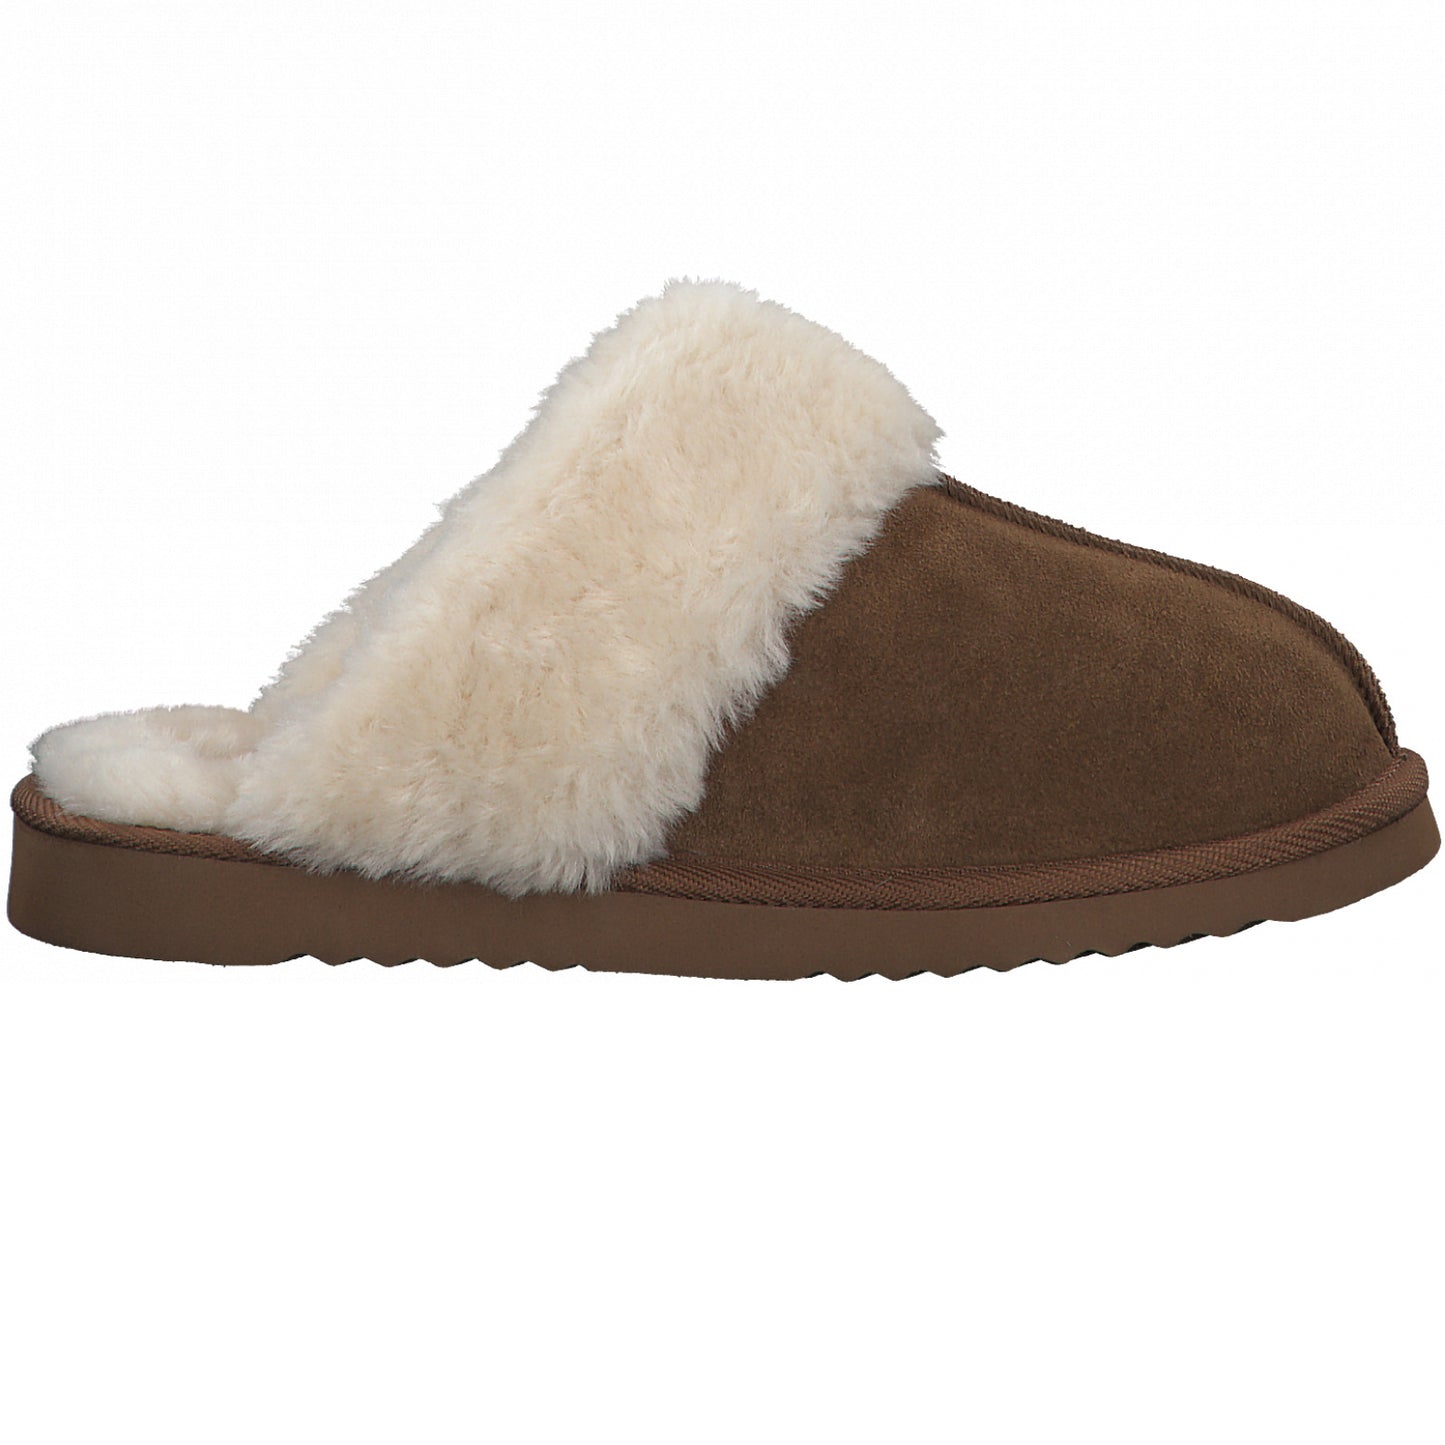 S Oliver 5-5-27100-37 311 Tan Slippers